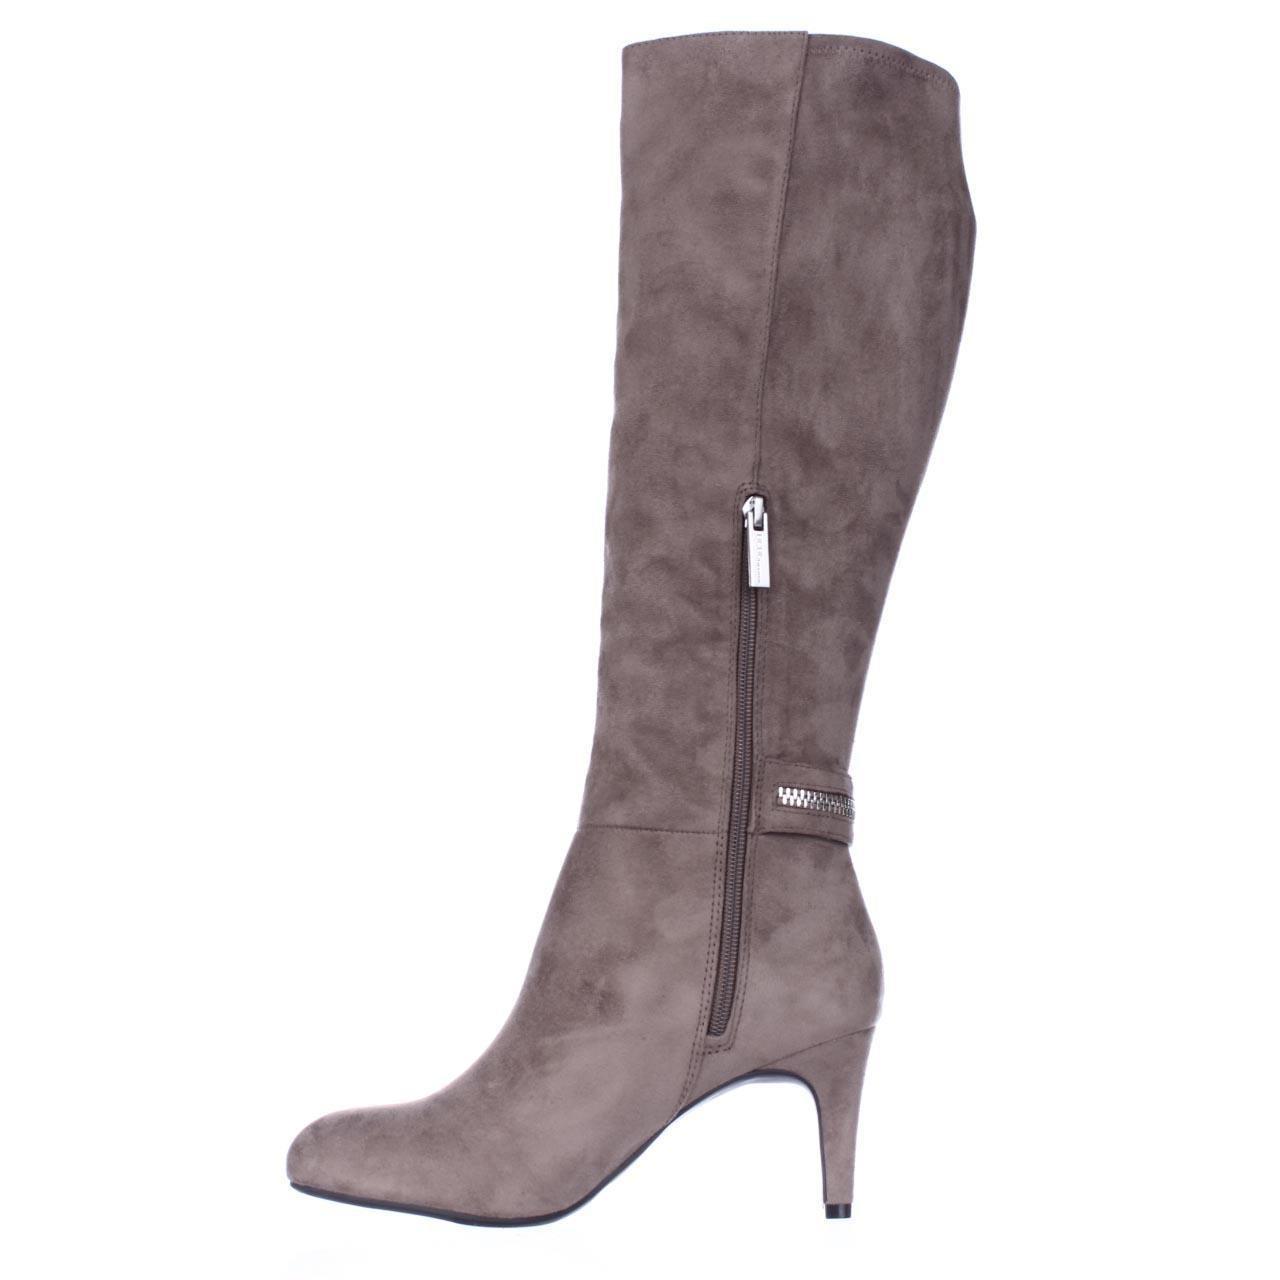 BCBGeneration Rigbie Knee High Dress Boots in Taupe (Brown) - Lyst